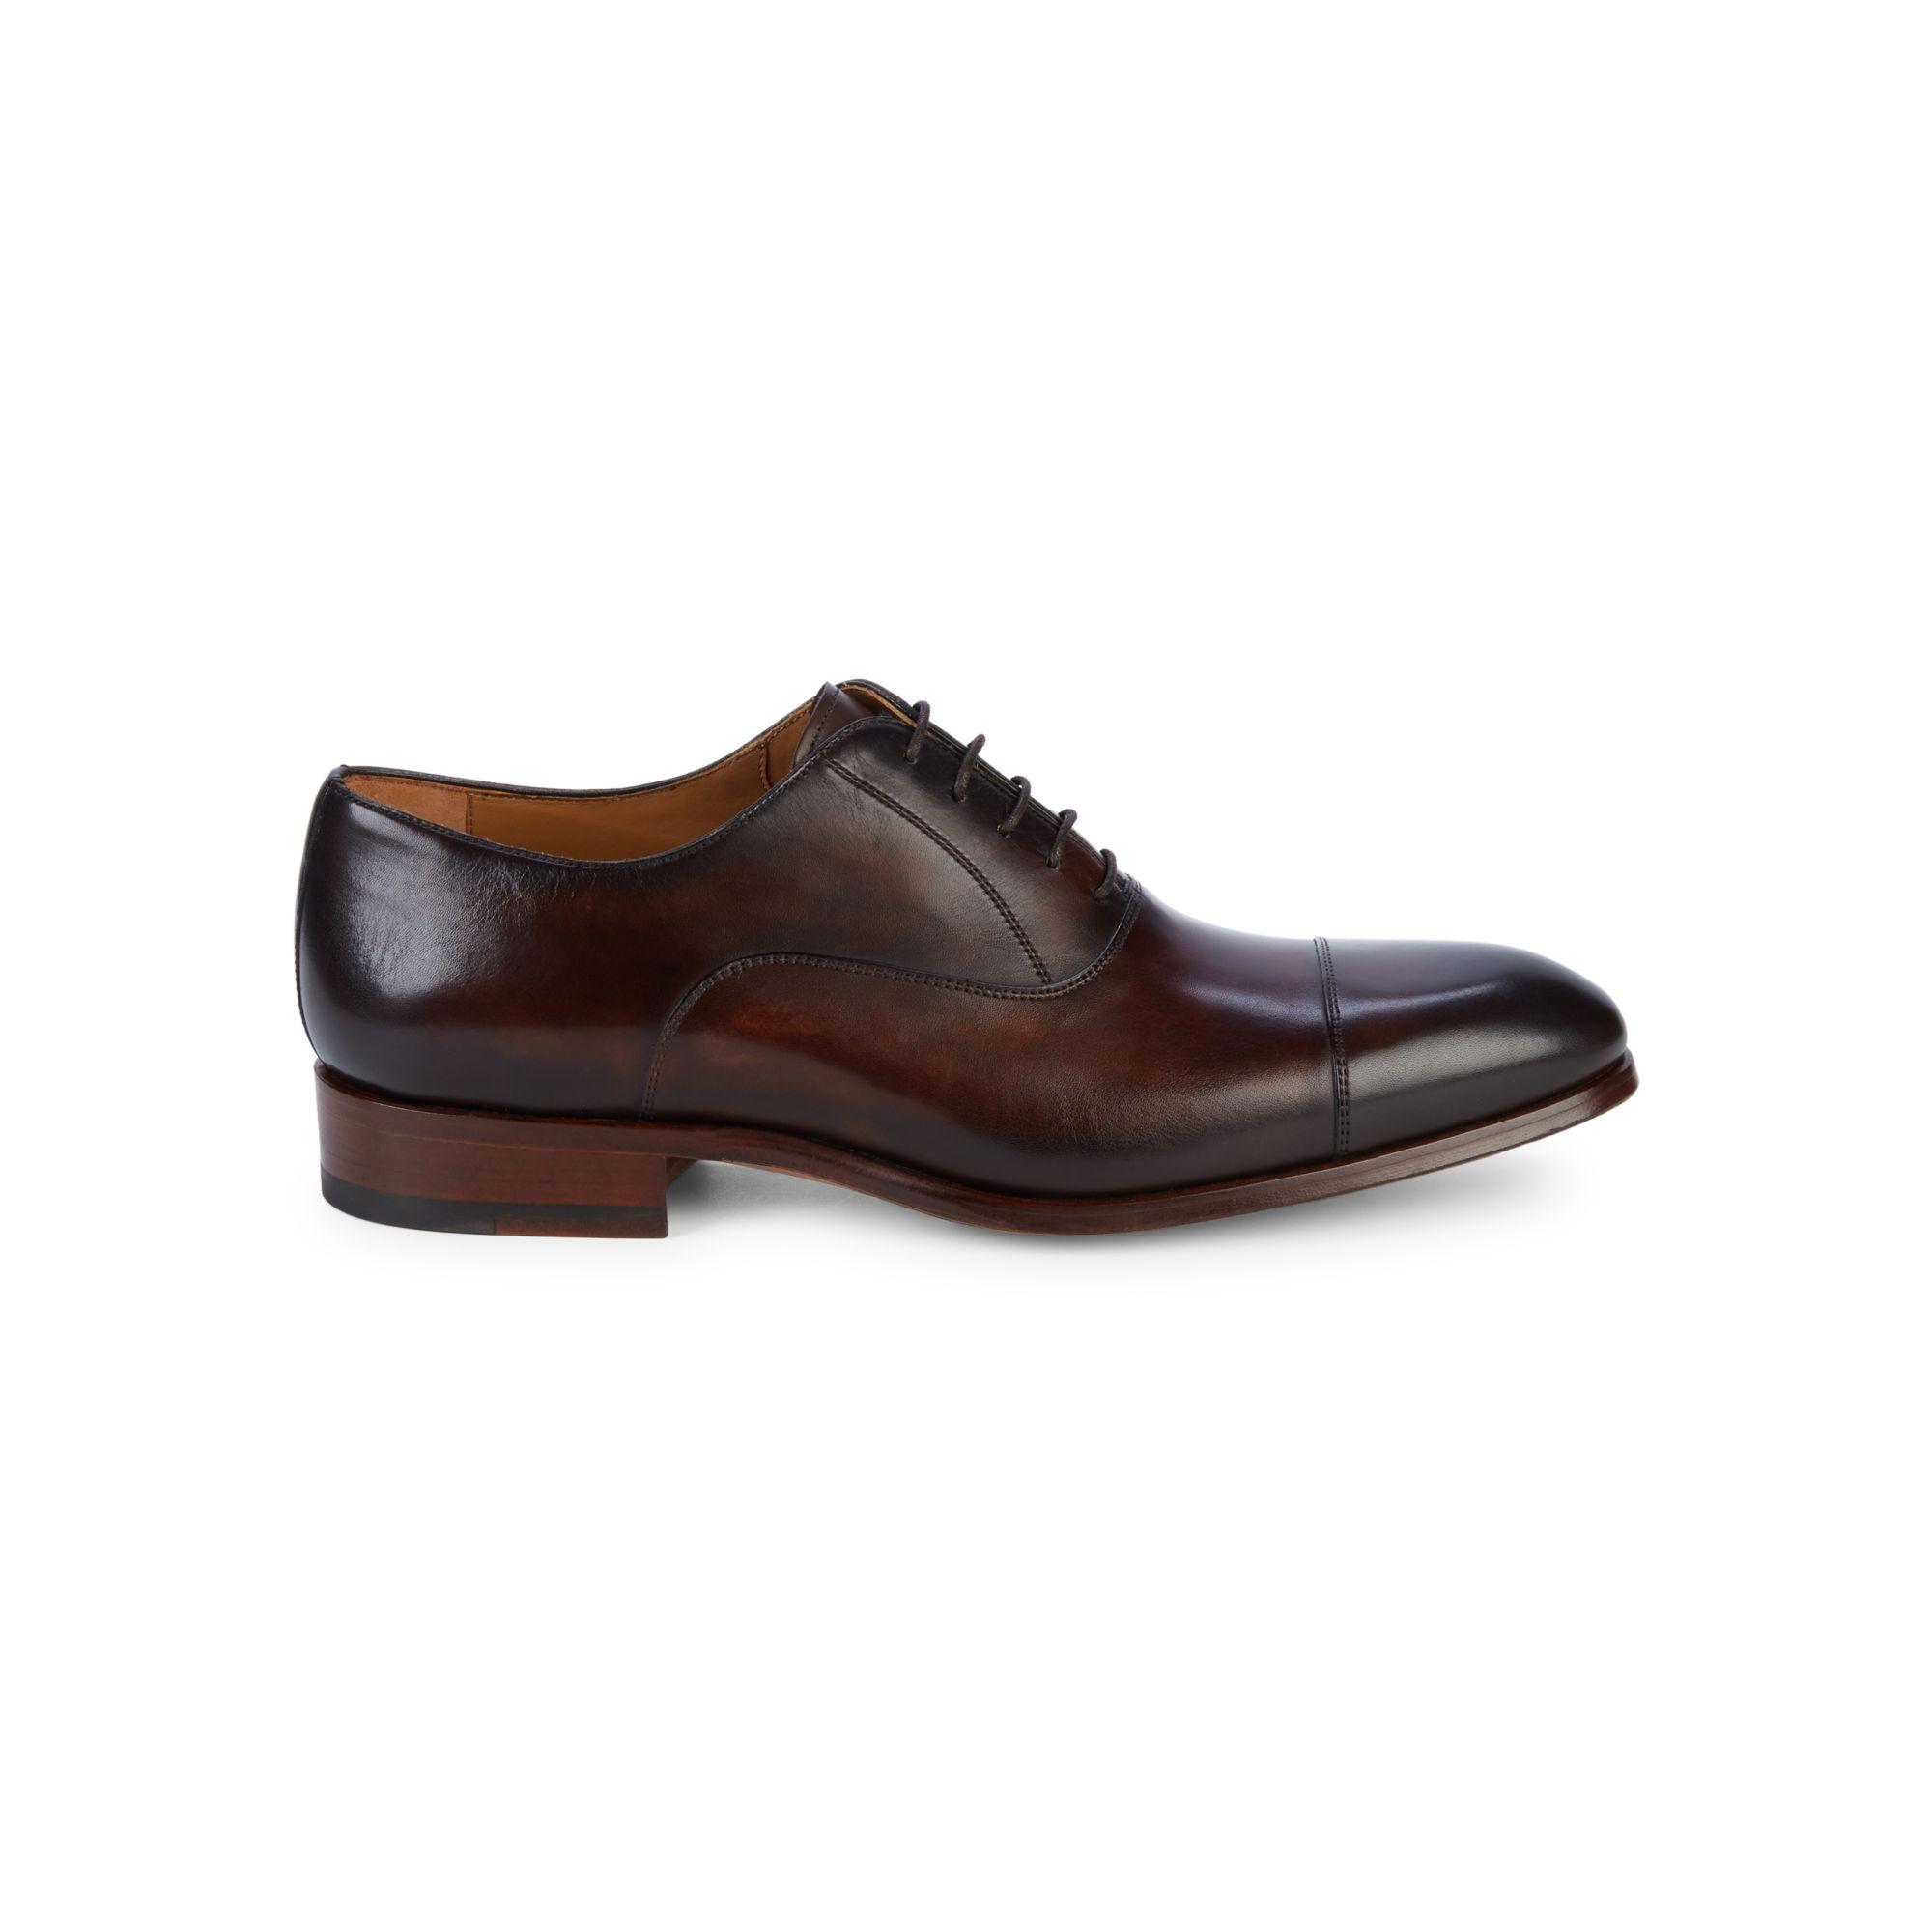 Magnanni Cap-toe Leather Oxfords in Brown for Men - Lyst